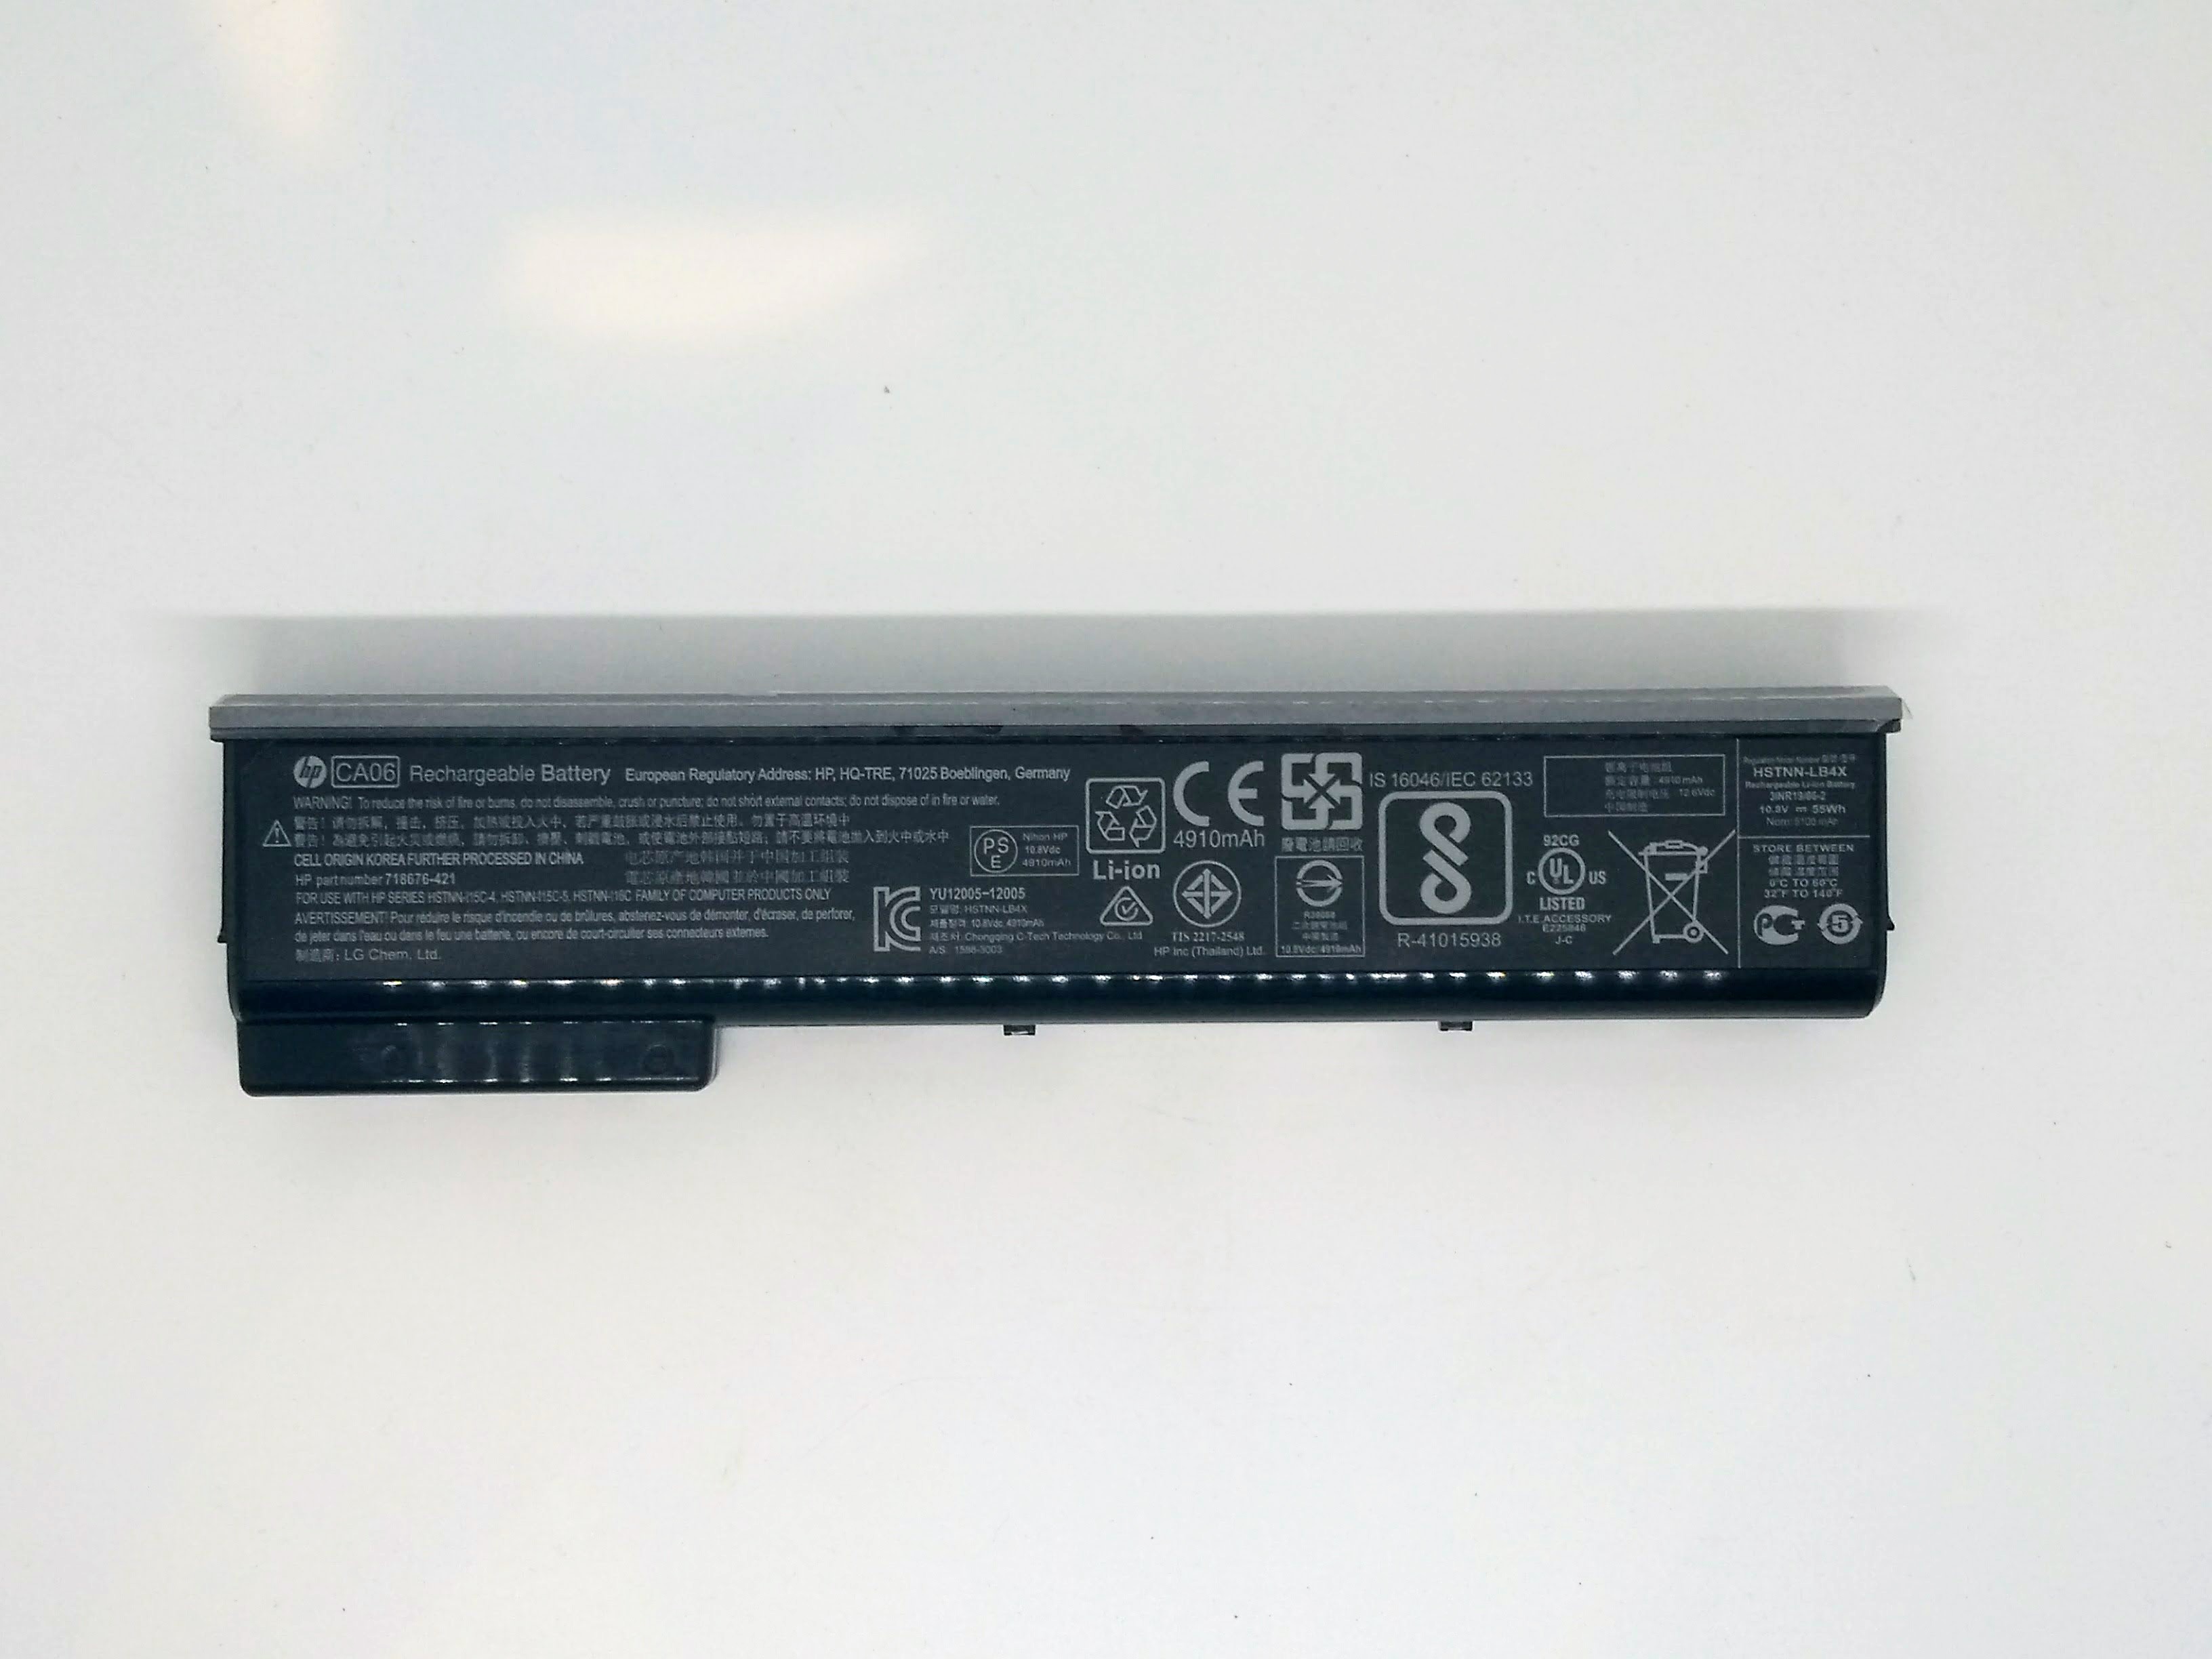 HP MT41 MOBILE THIN CLIENT - LY622EA Battery 718755-001